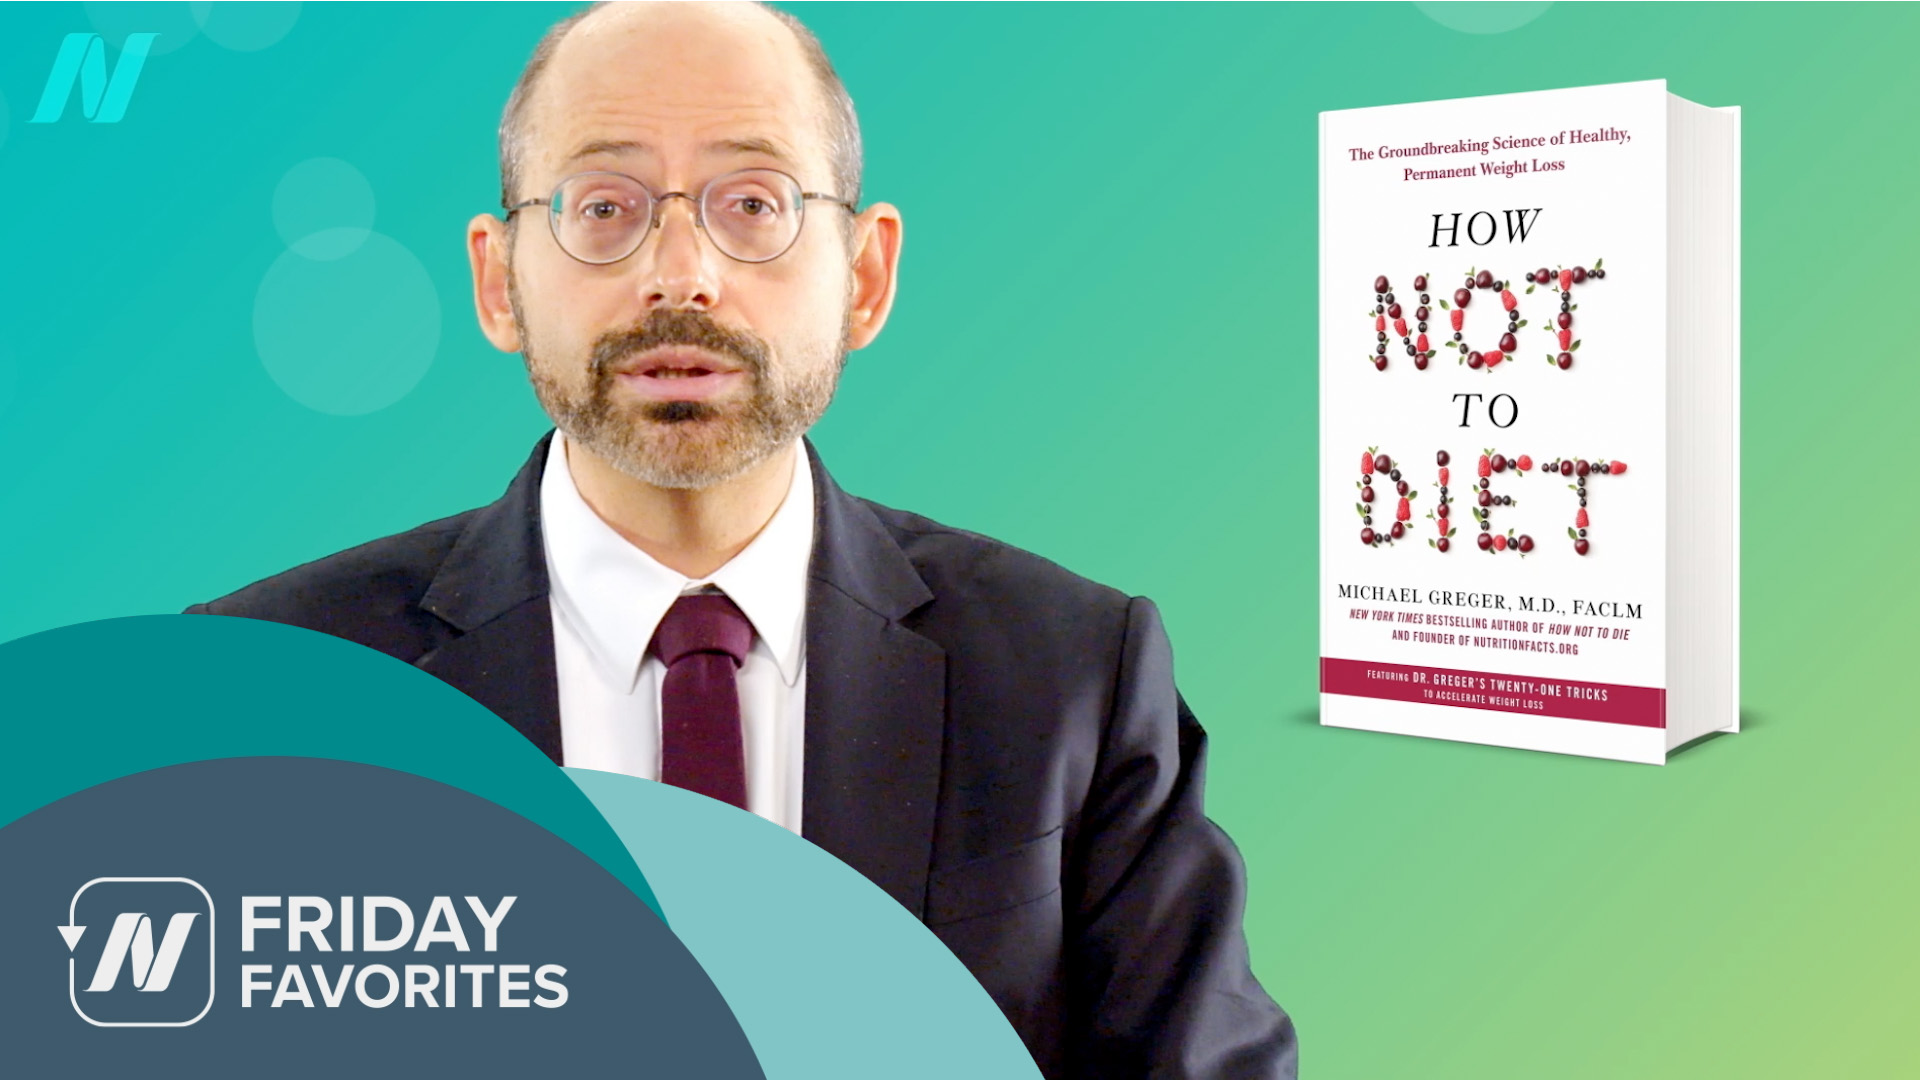 Dr. Greger with his book How Not to Diet